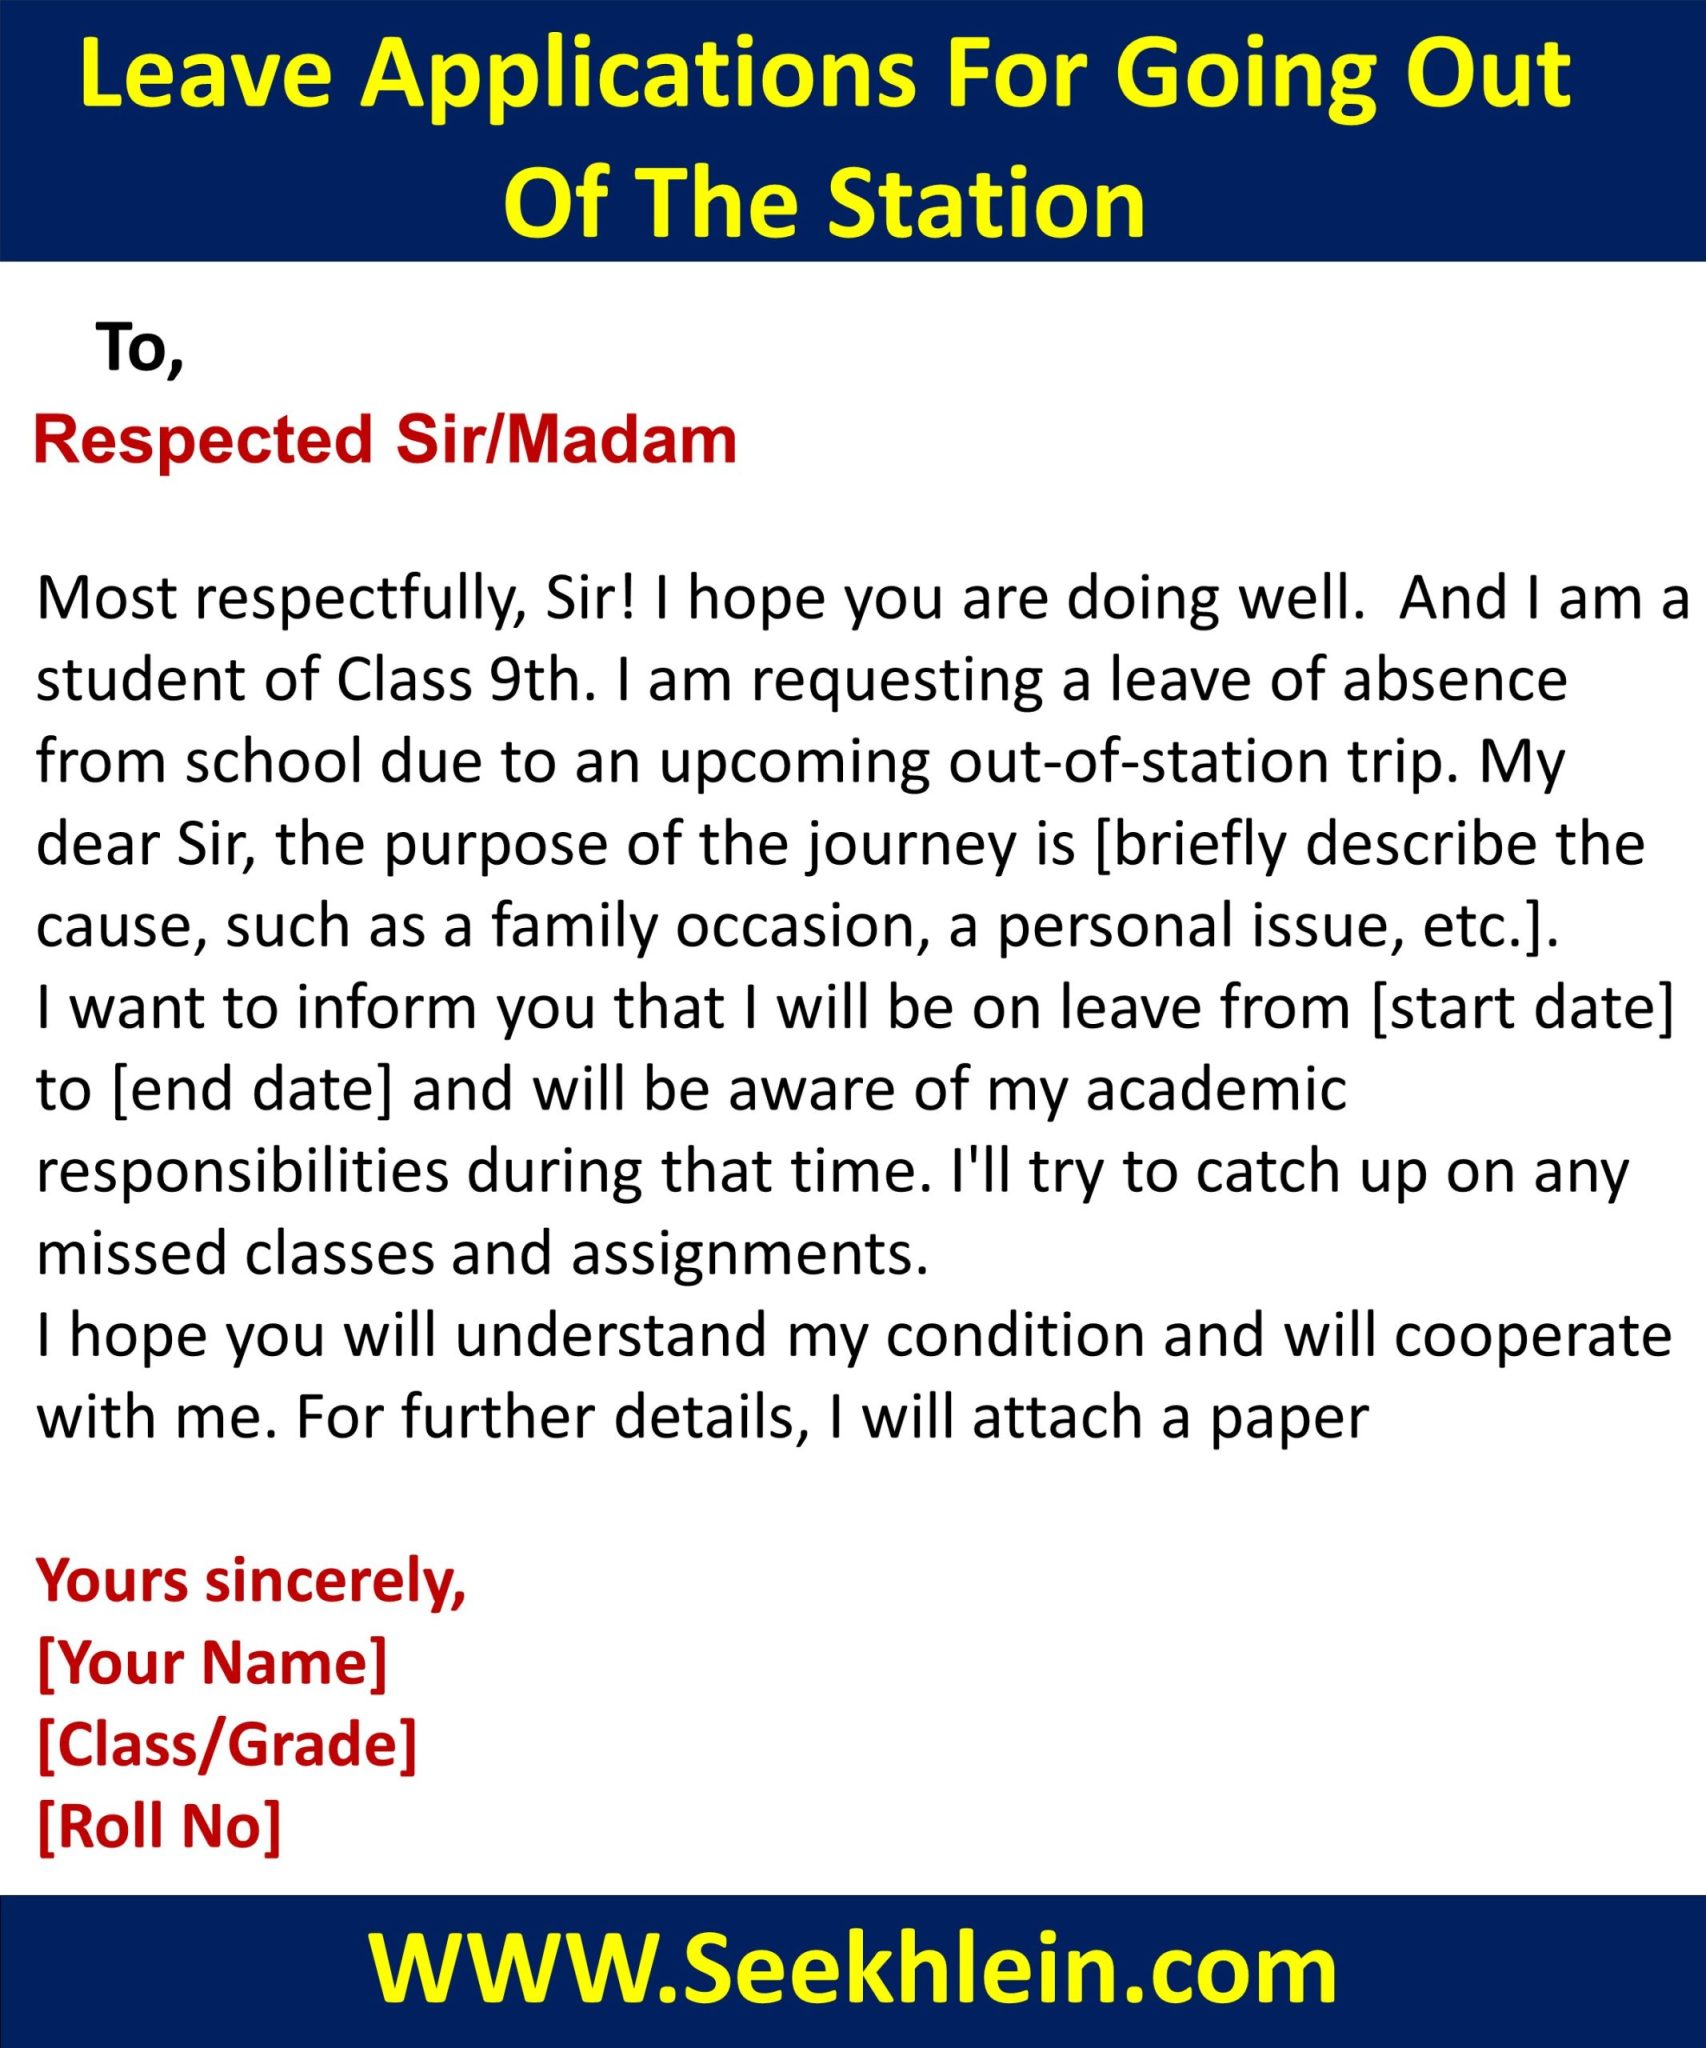 Leave Application To Principal For Going Out Of Station